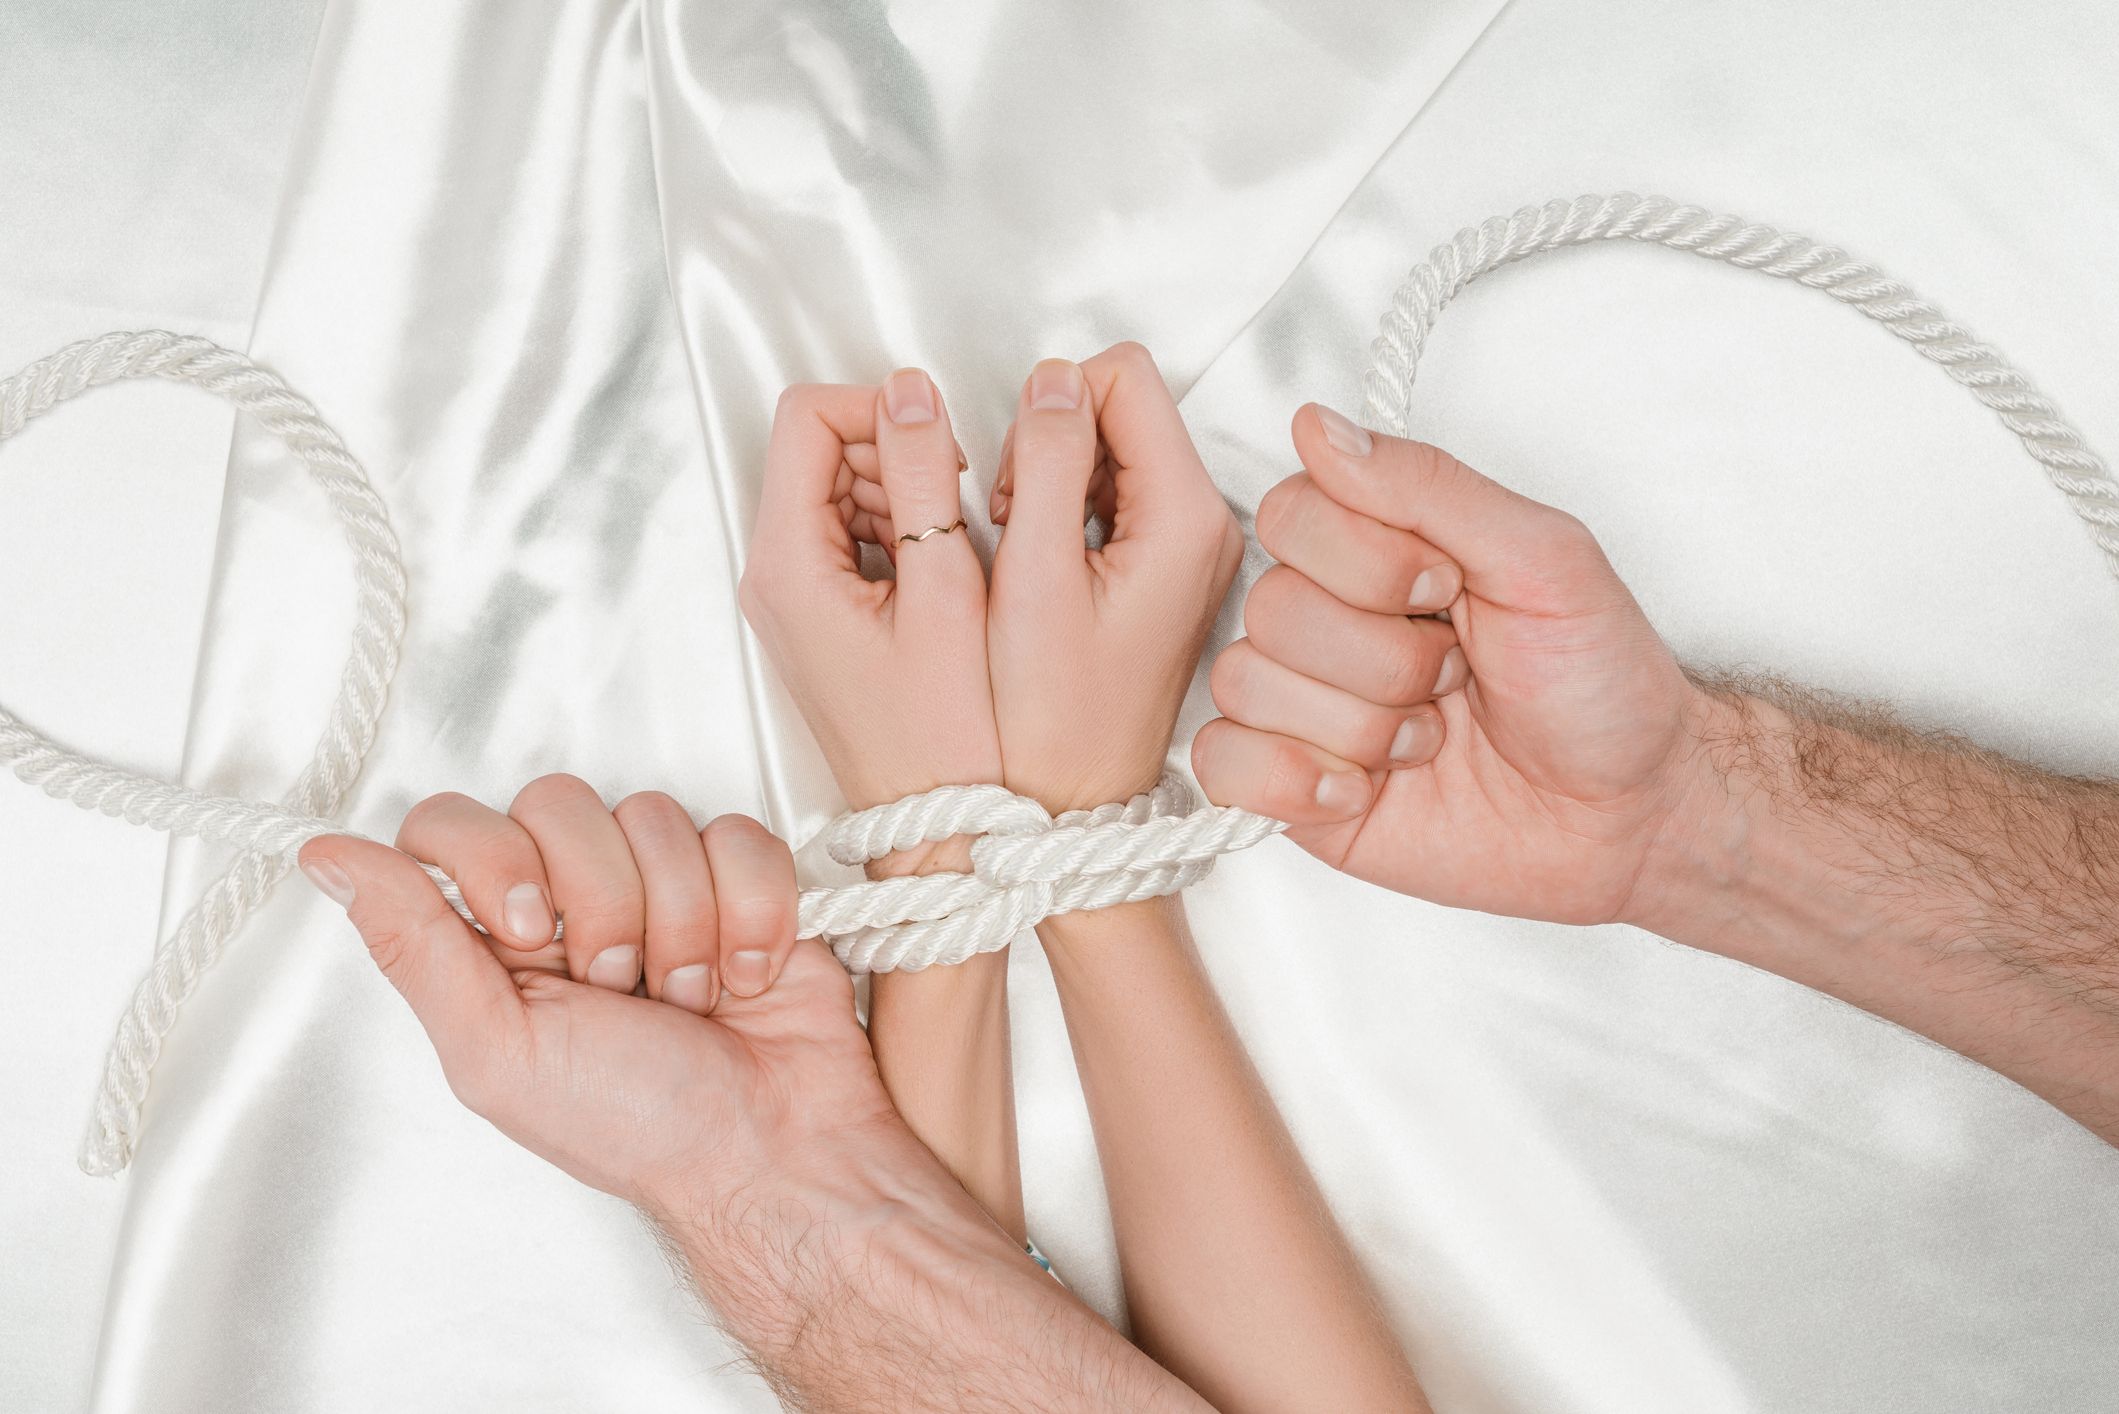 gentle bondage pictures for married couples Xxx Pics Hd